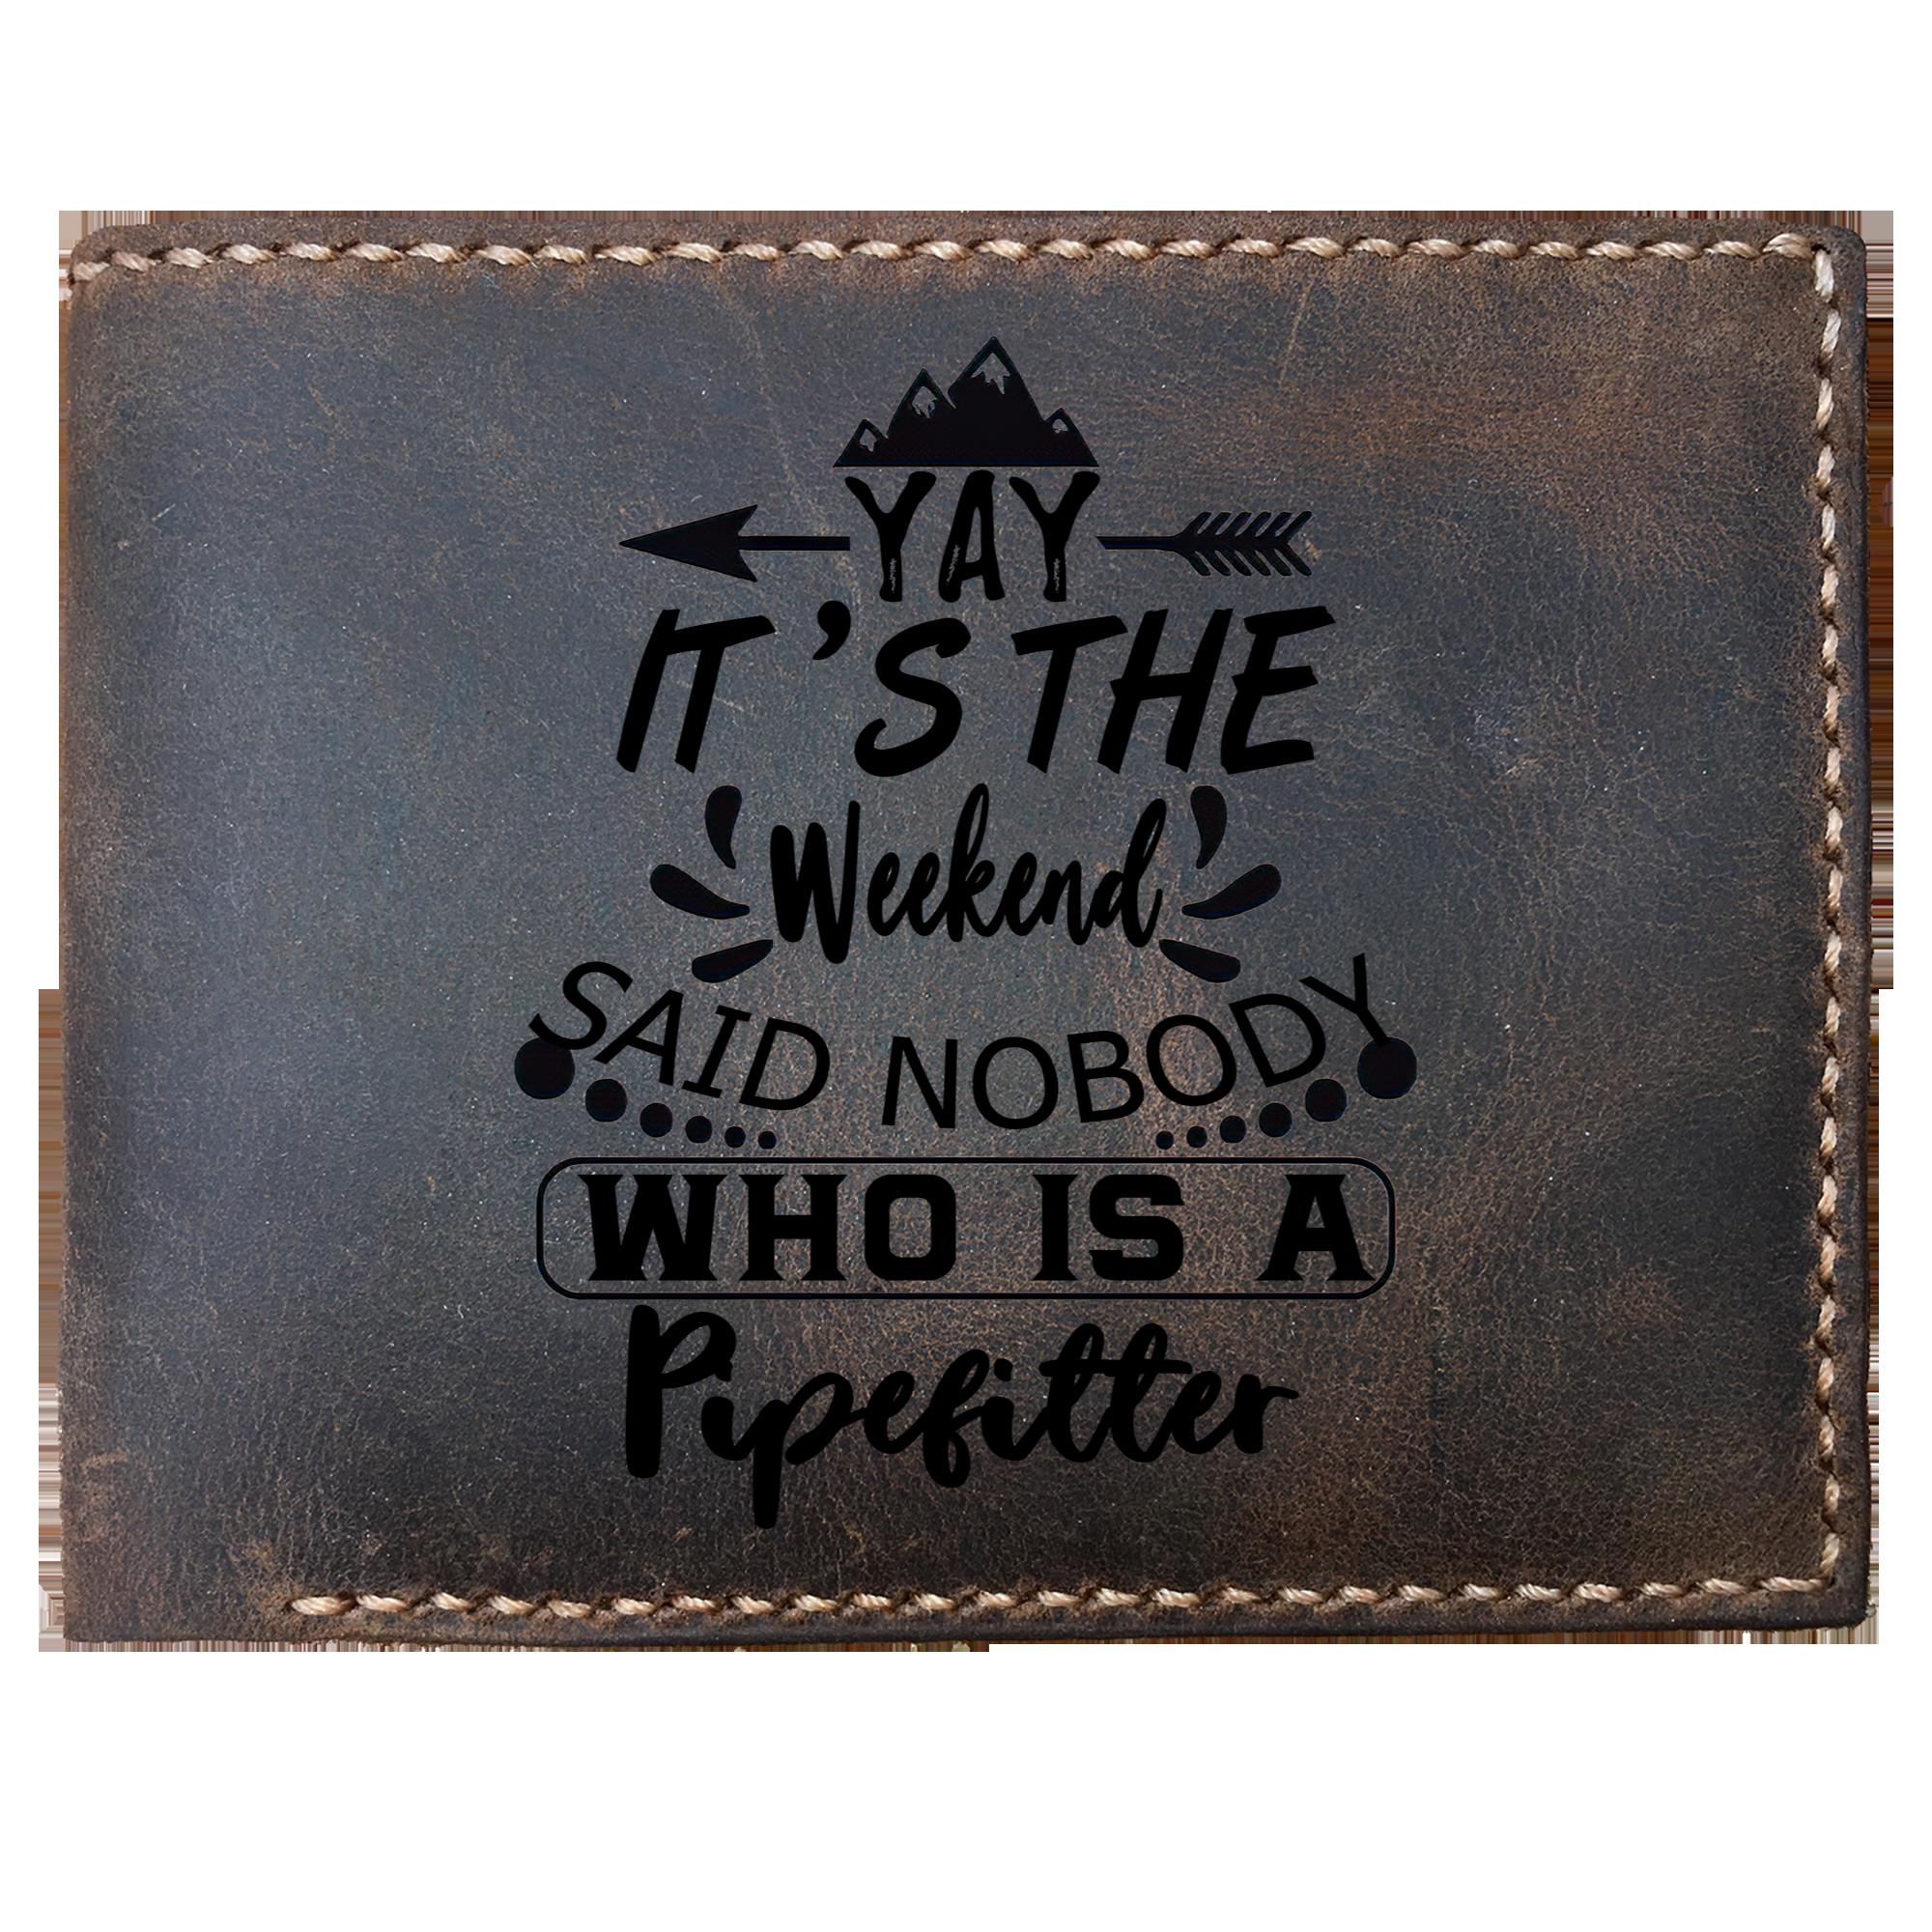 Skitongifts Funny Custom Laser Engraved Bifold Leather Wallet For Men, It's The Weekend Said Nobody Who Is A Pipefitter, Father's Day Gifts